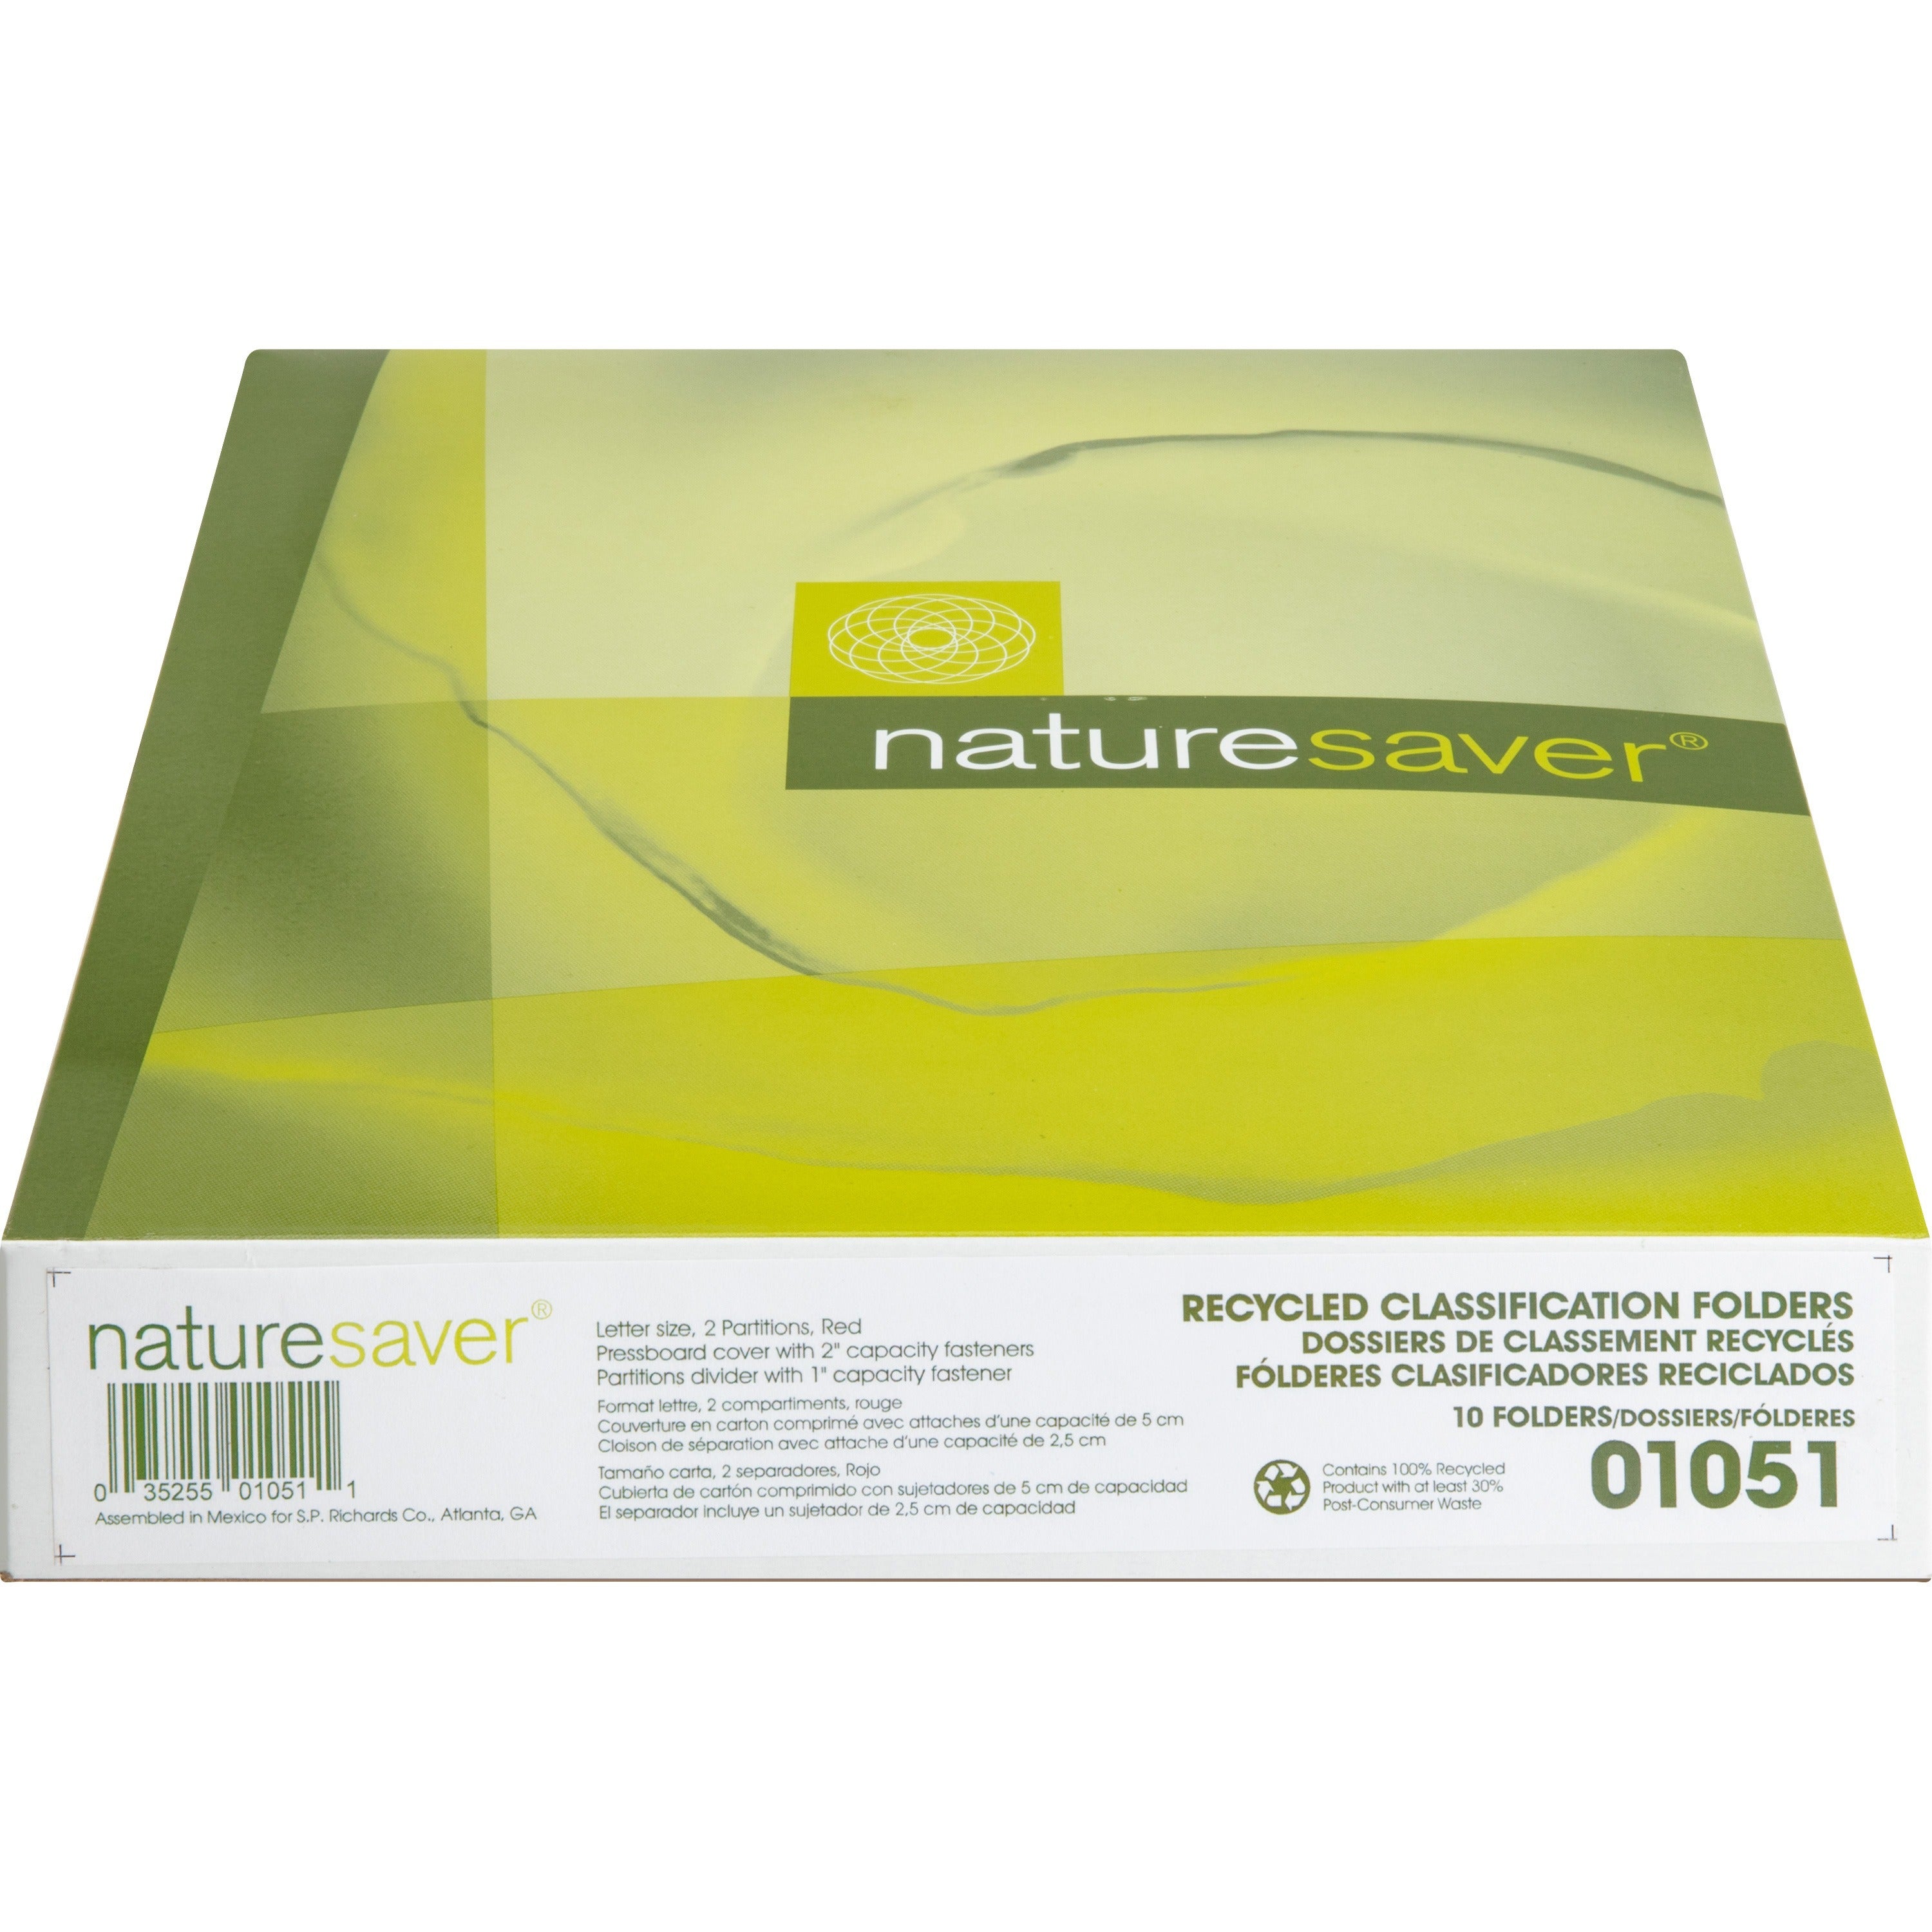 Nature Saver 2/5 Tab Cut Letter Recycled Classification Folder - 8 1/2" x 11" - 6 Fastener(s) - 2" Fastener Capacity for Folder, 1" Fastener Capacity for Divider - 2 Divider(s) - Pressboard - Red - 100% Recycled - 10 / Box - 